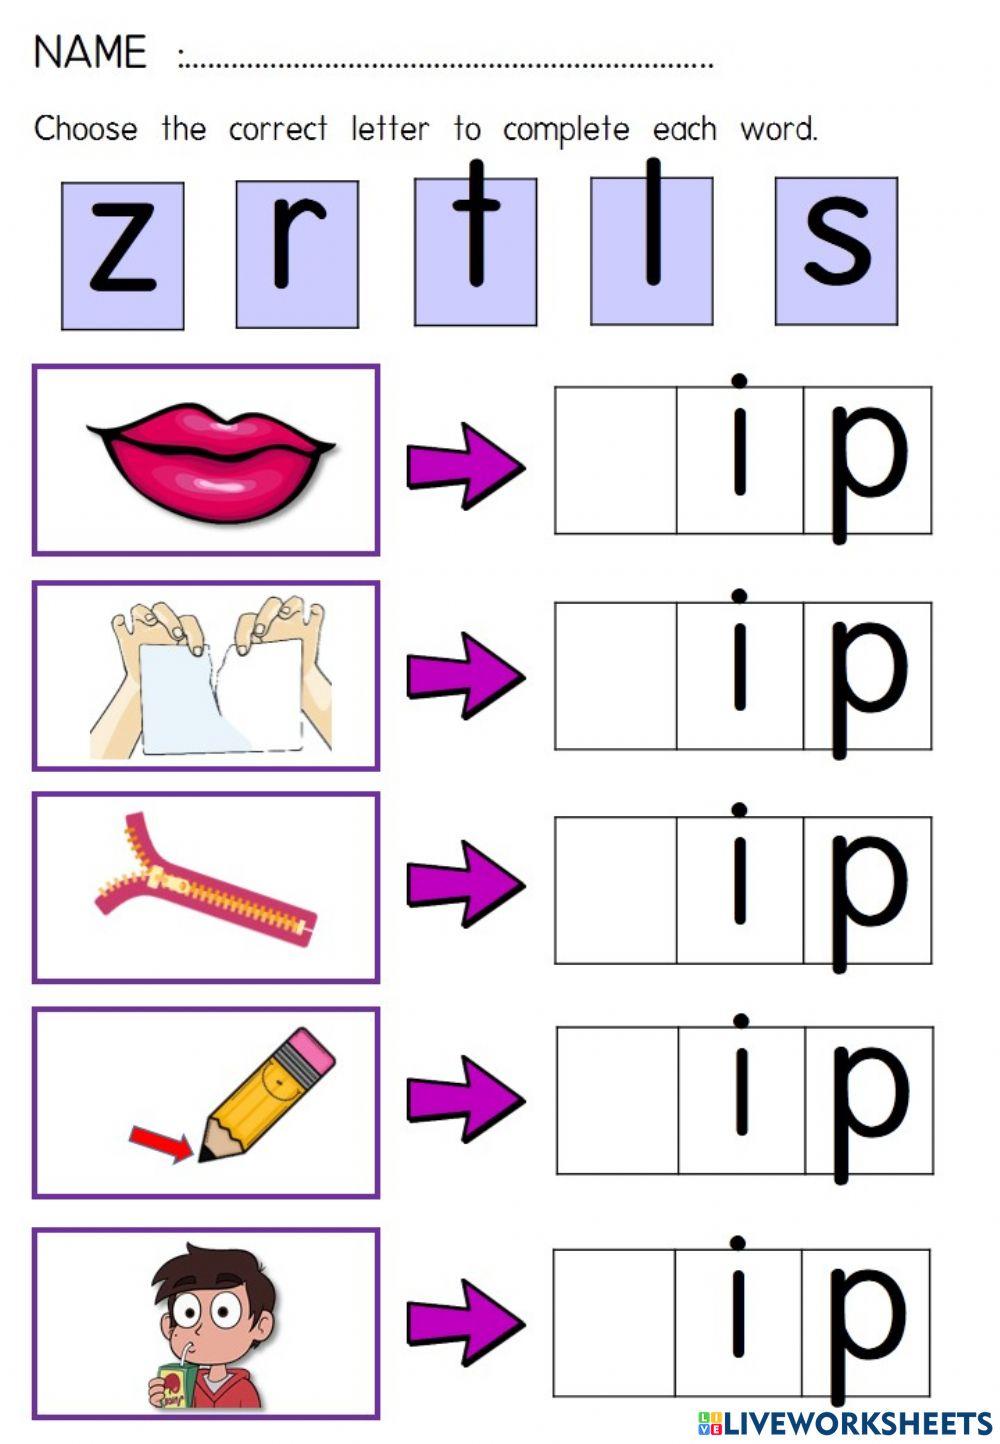 ip Word Family interactive worksheet | Live Worksheets